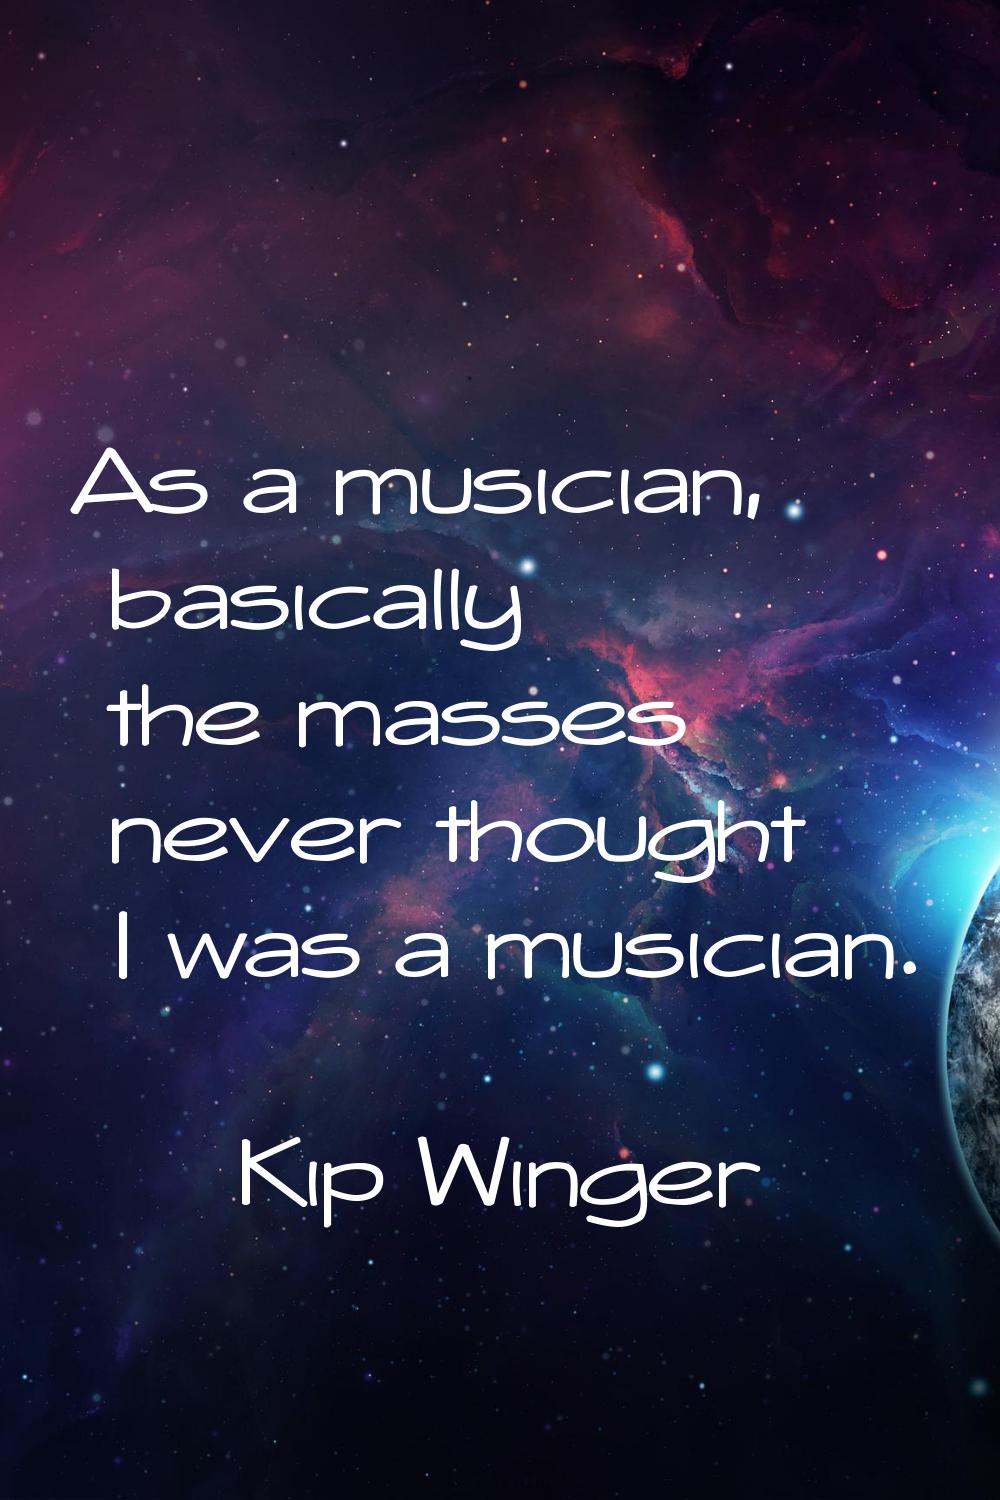 As a musician, basically the masses never thought I was a musician.